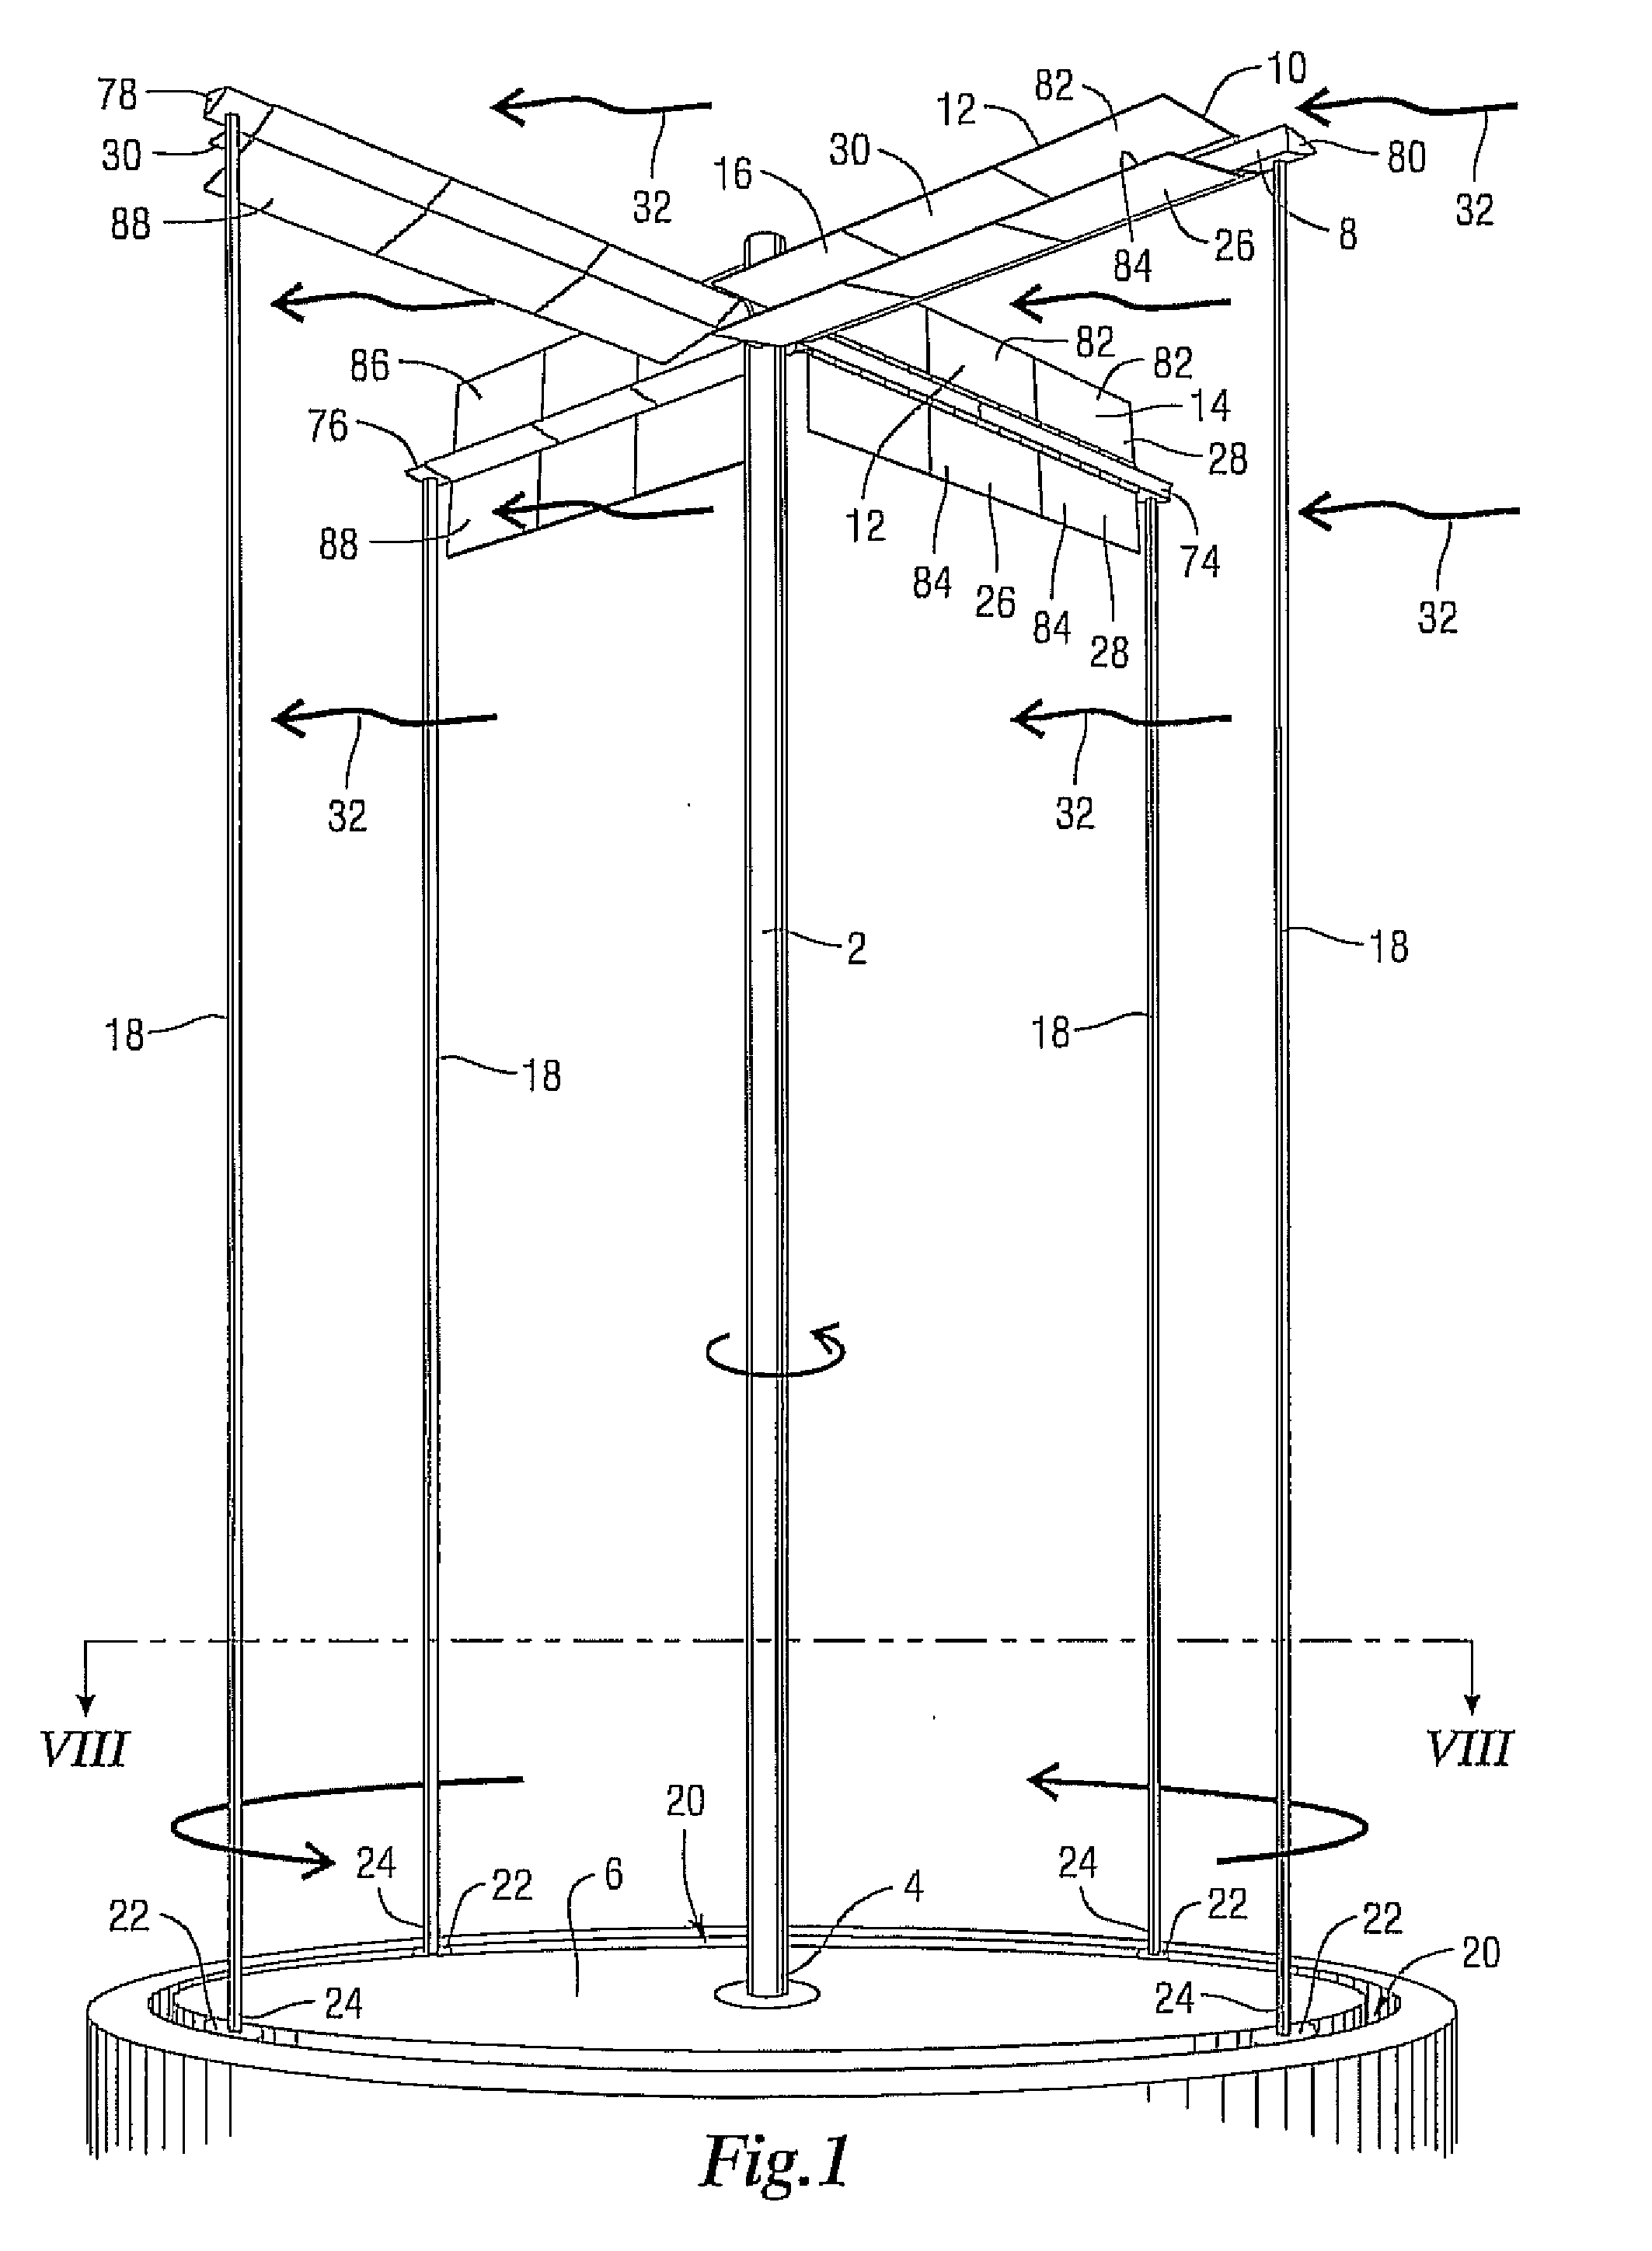 Method and Apparatus for Capturing Wind to Produce Electrical Power